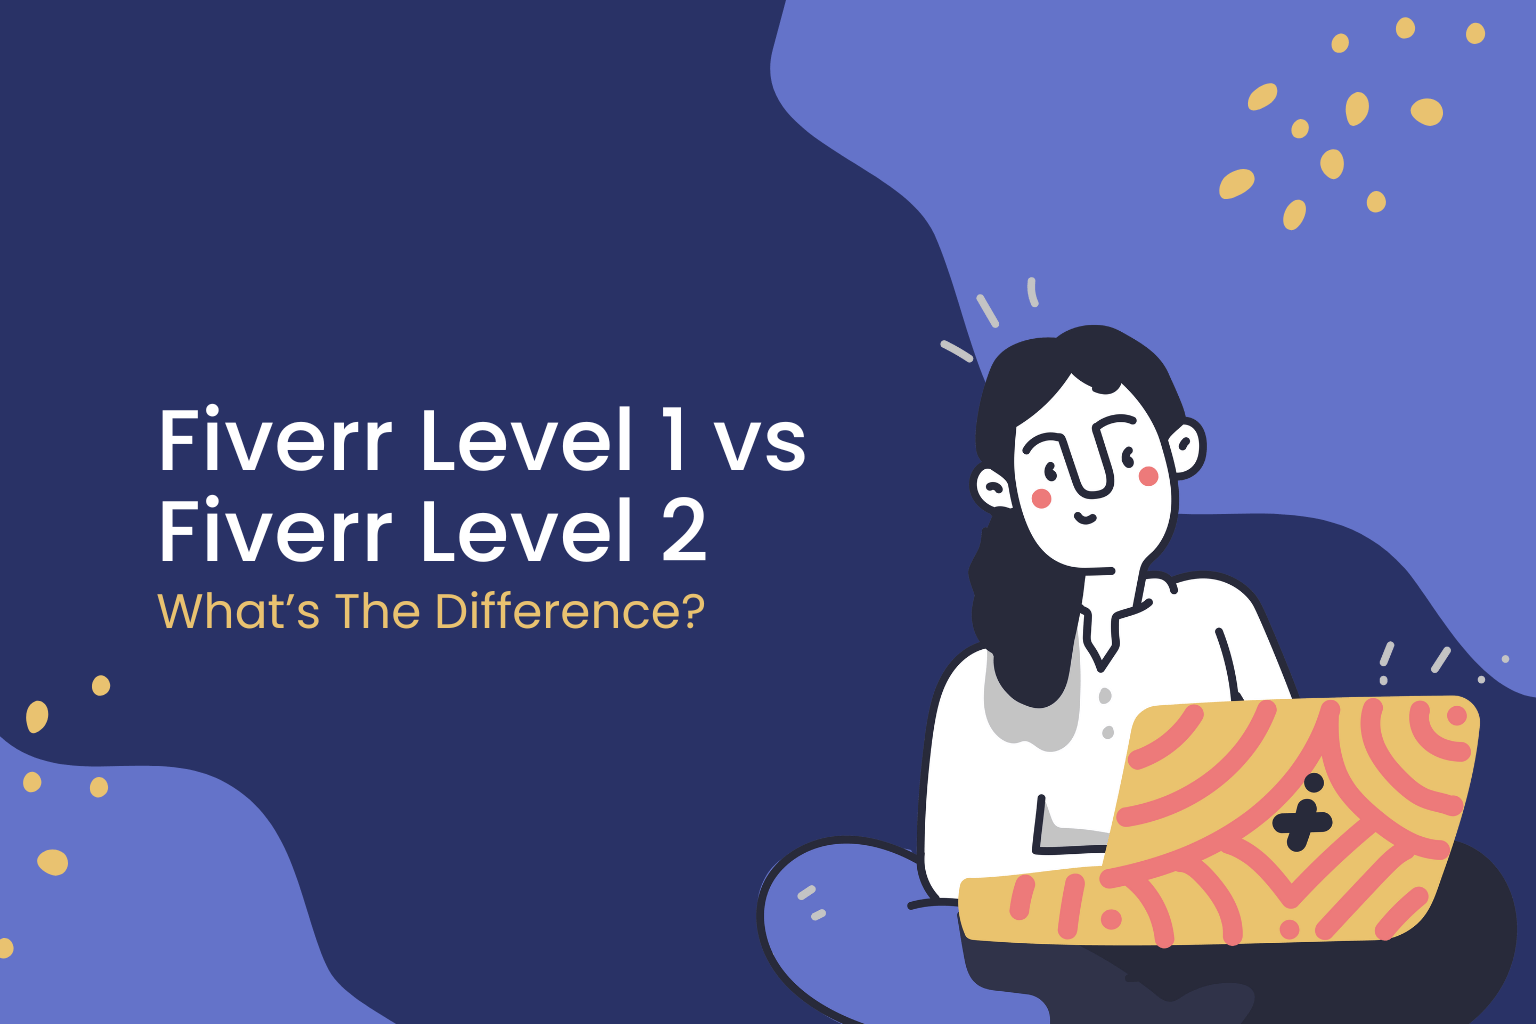 Fiverr Level 1 vs Fiverr Level 2 – What’s The Difference?